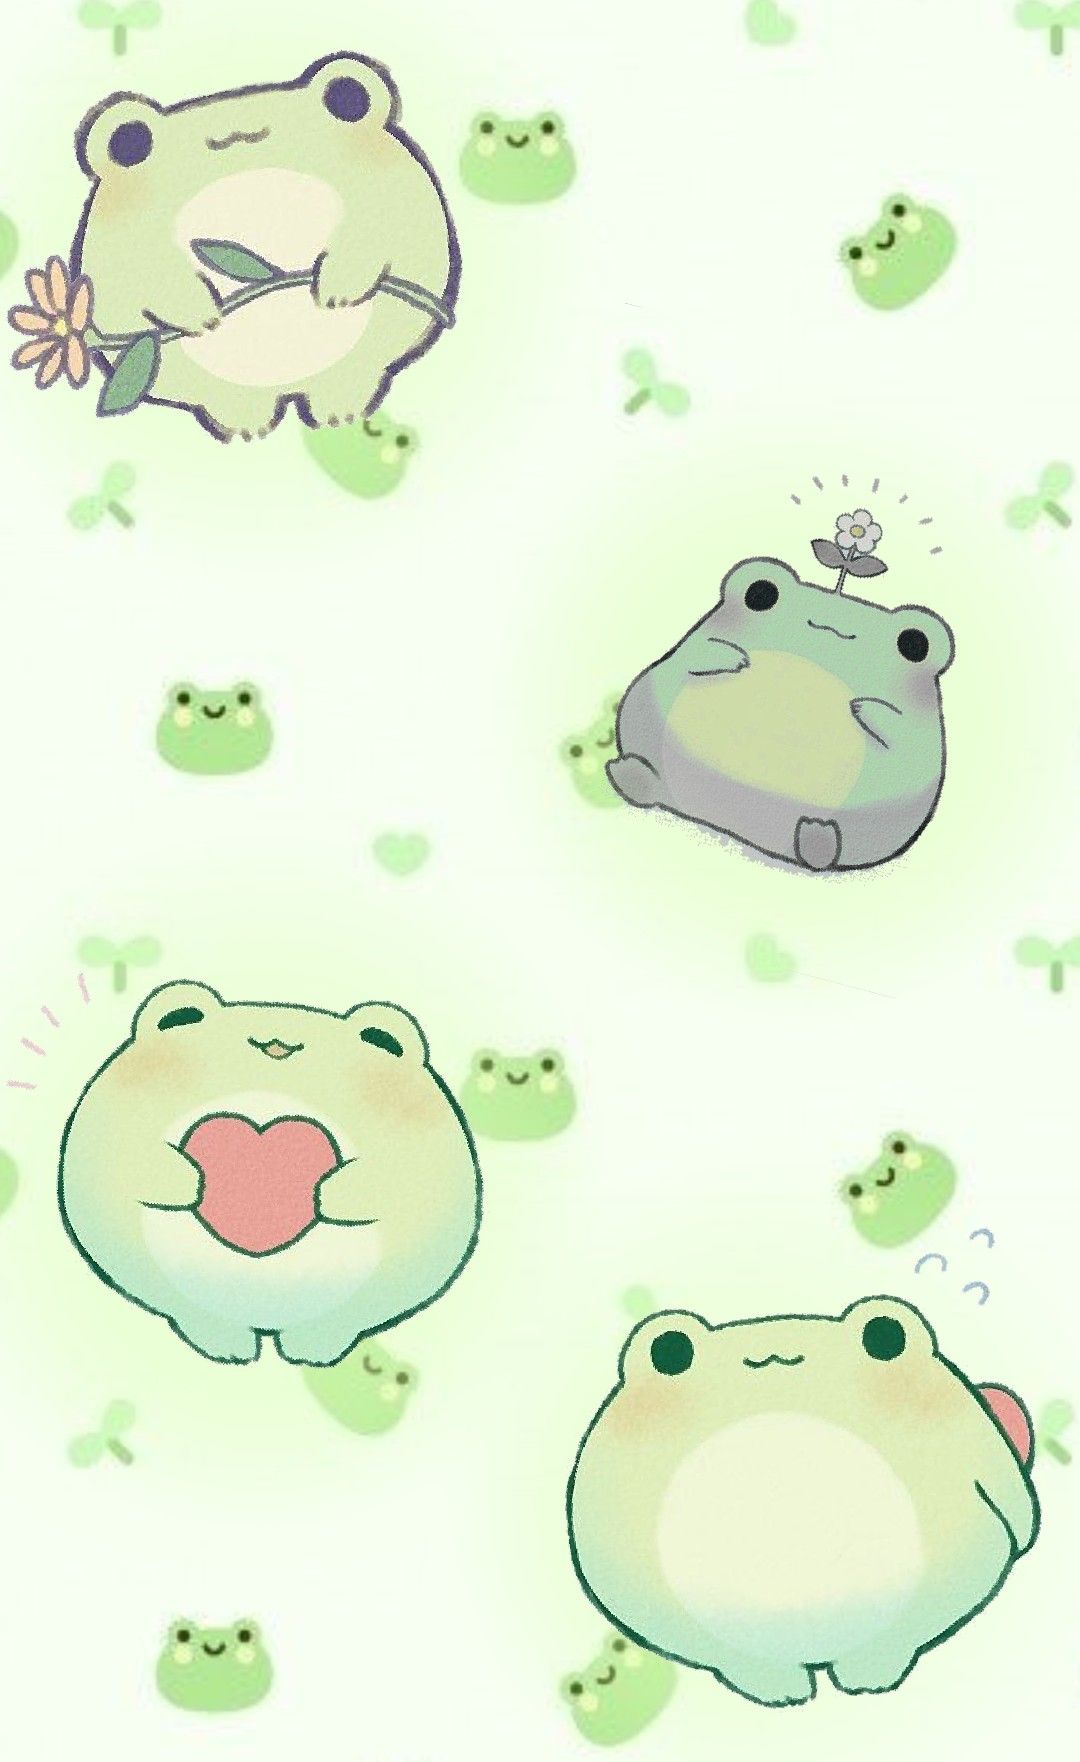 34959 Frog Drawings Images Stock Photos  Vectors  Shutterstock